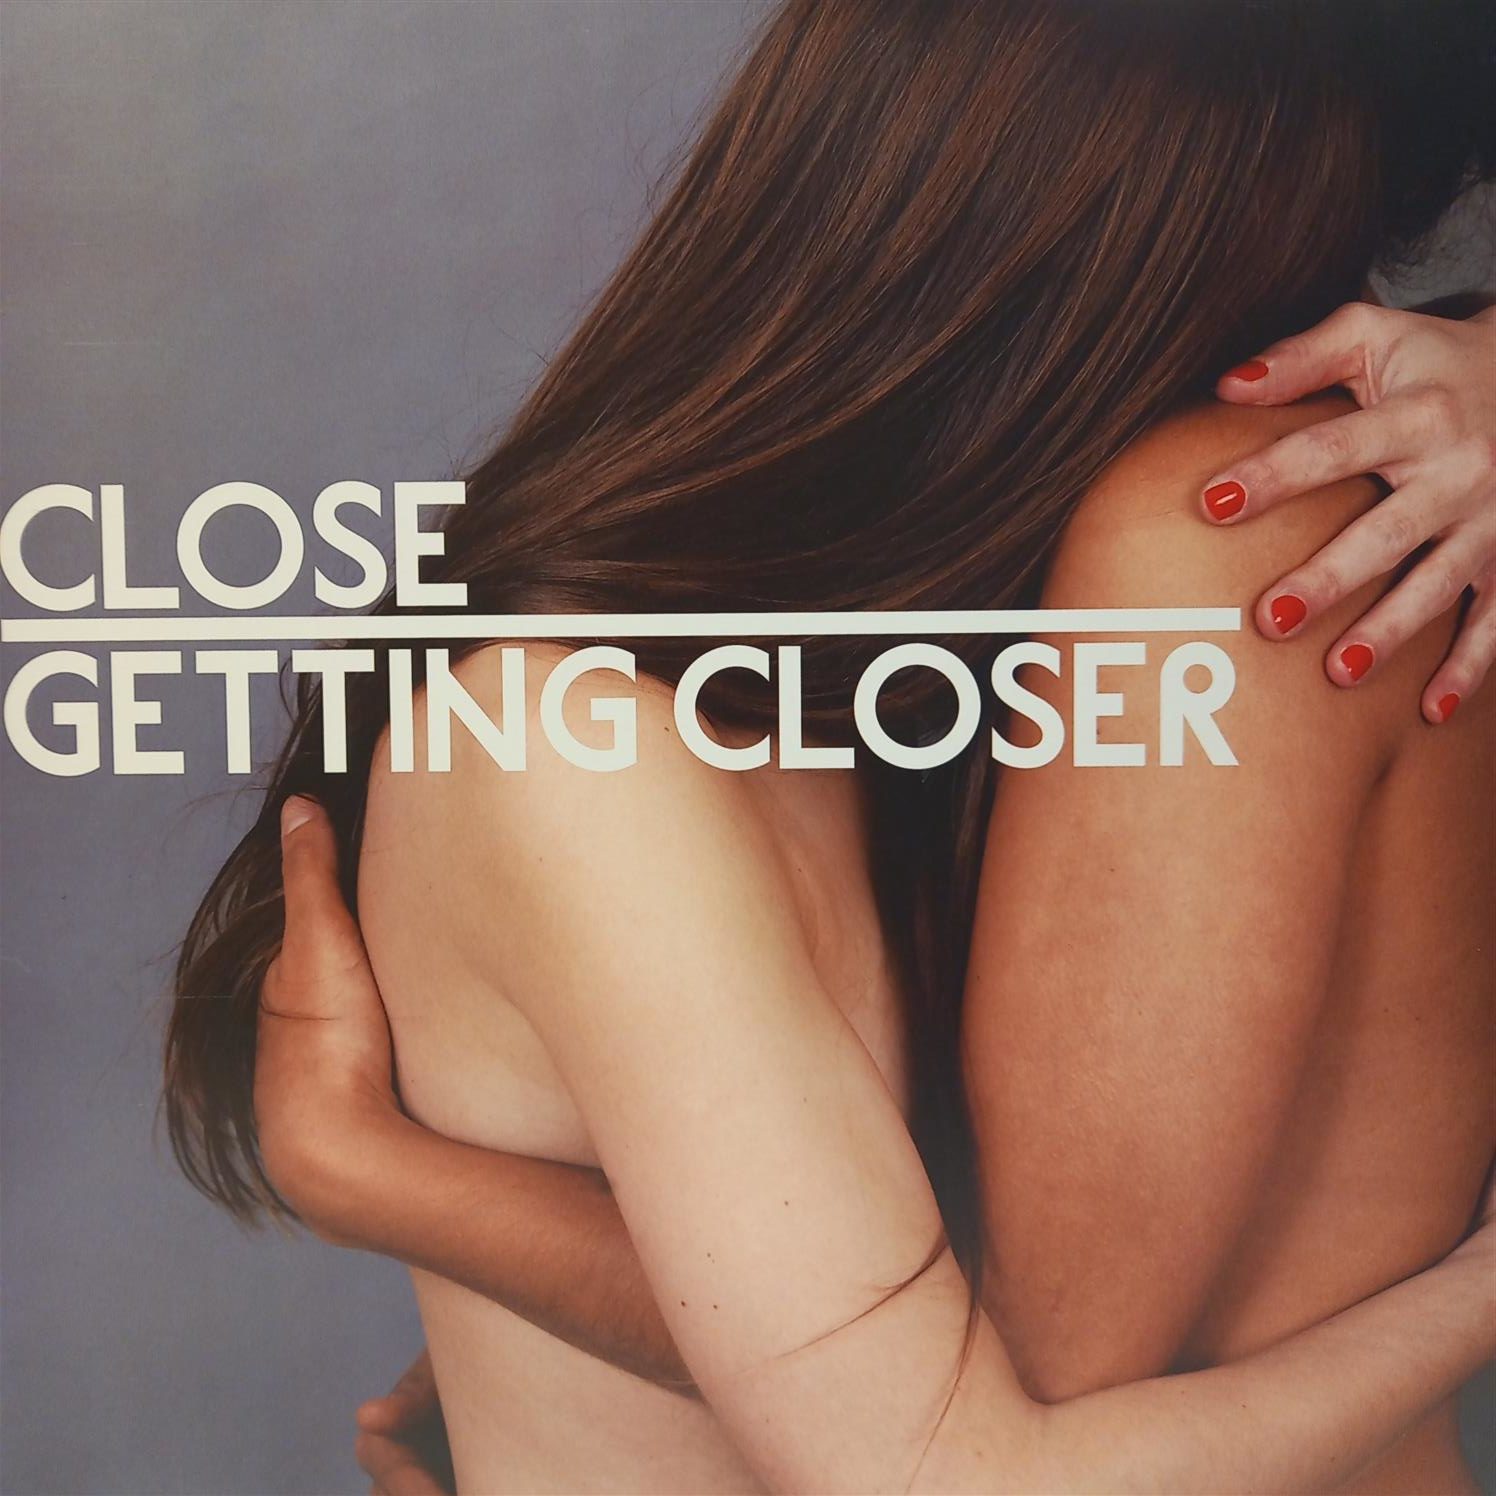 CLOSE – GETTING CLOSER ON